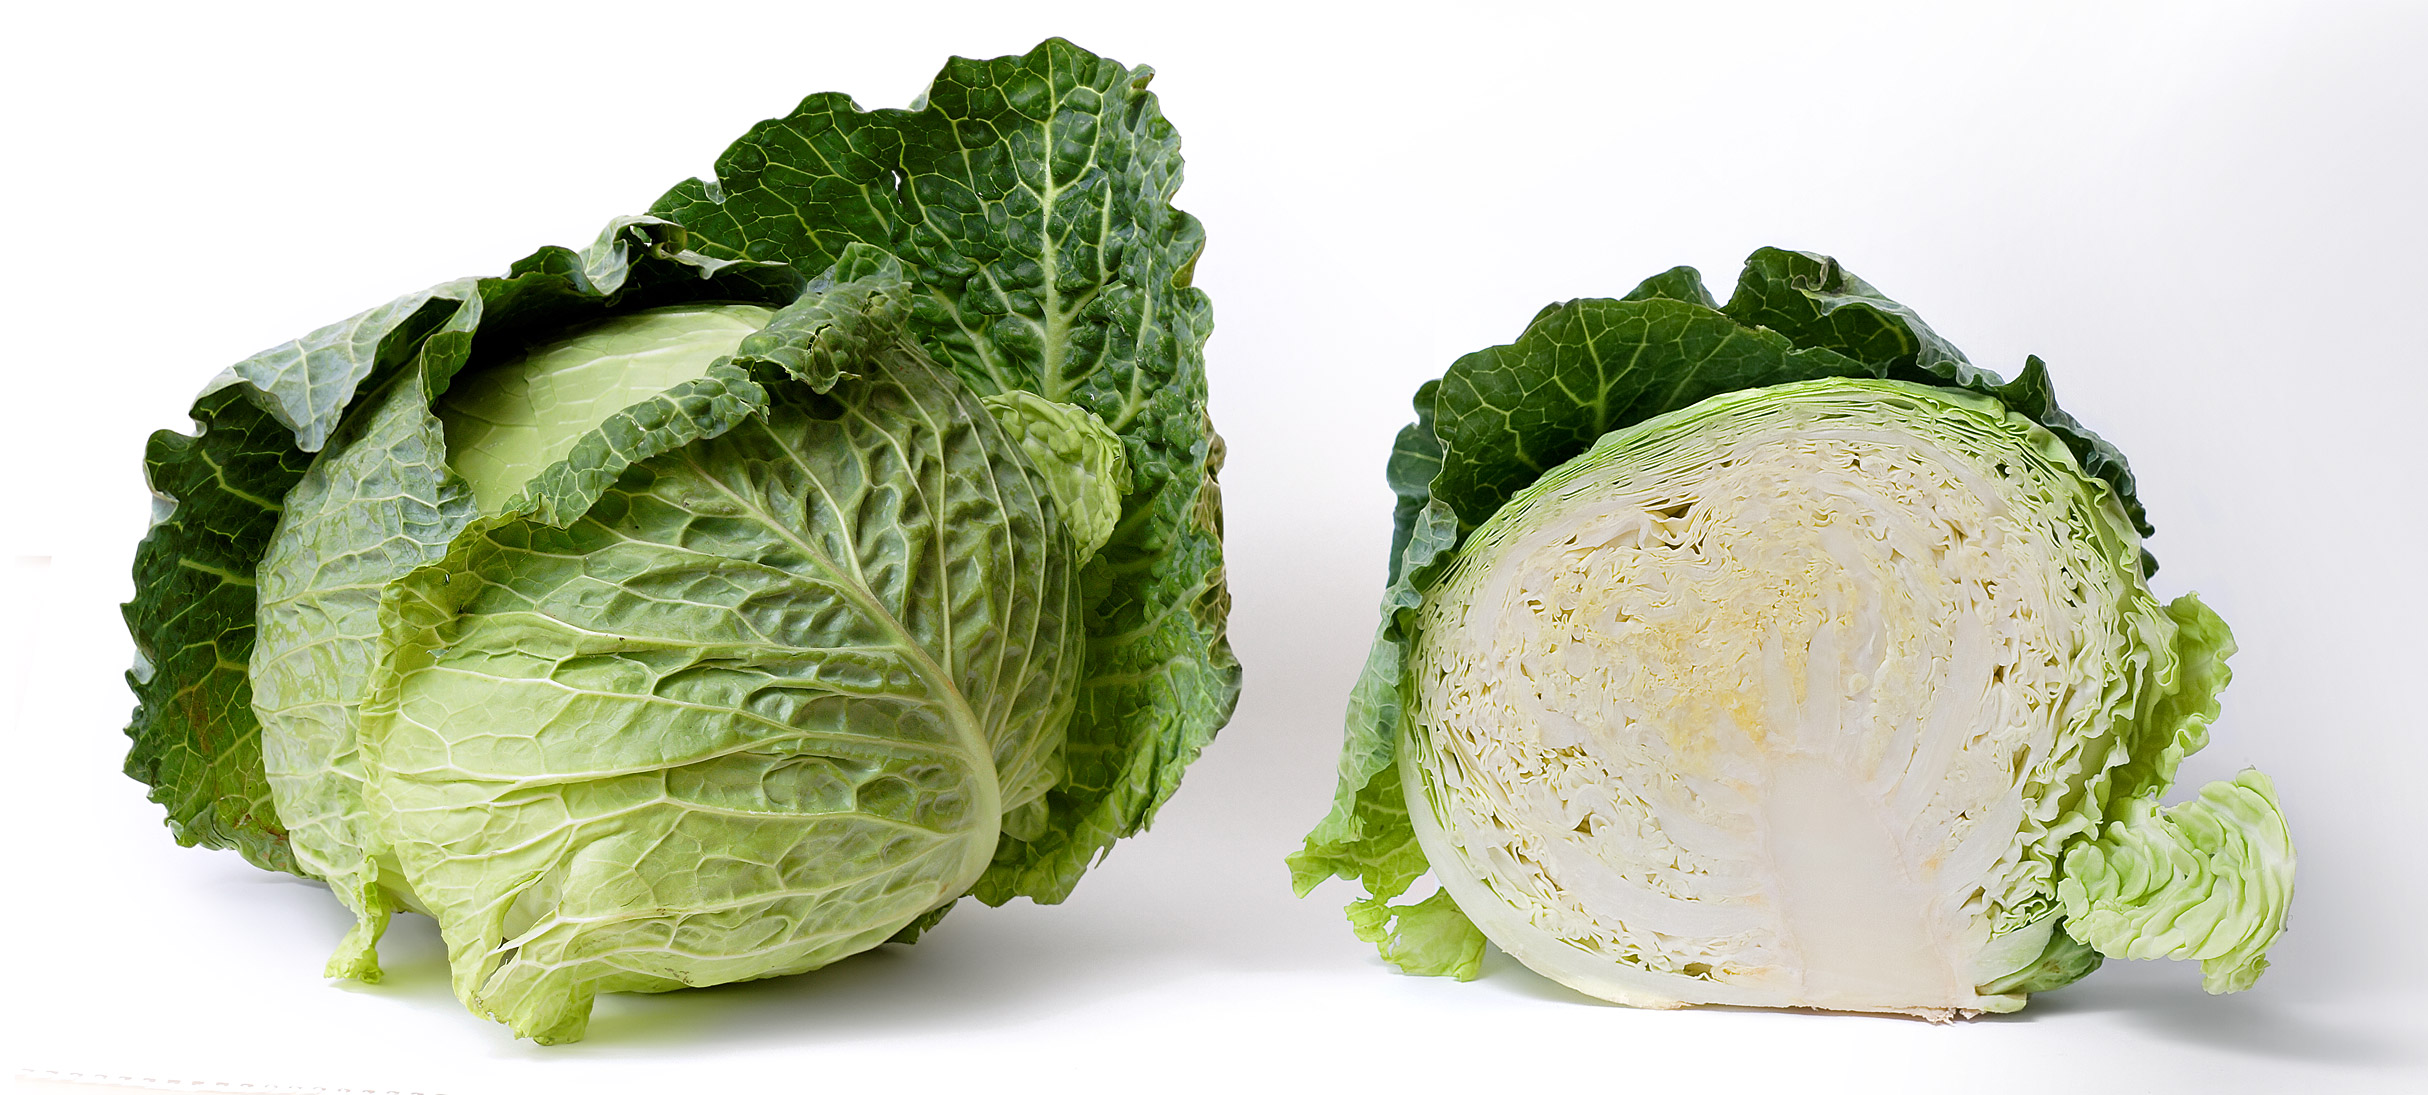 Detail Images Of Cabbage Nomer 9